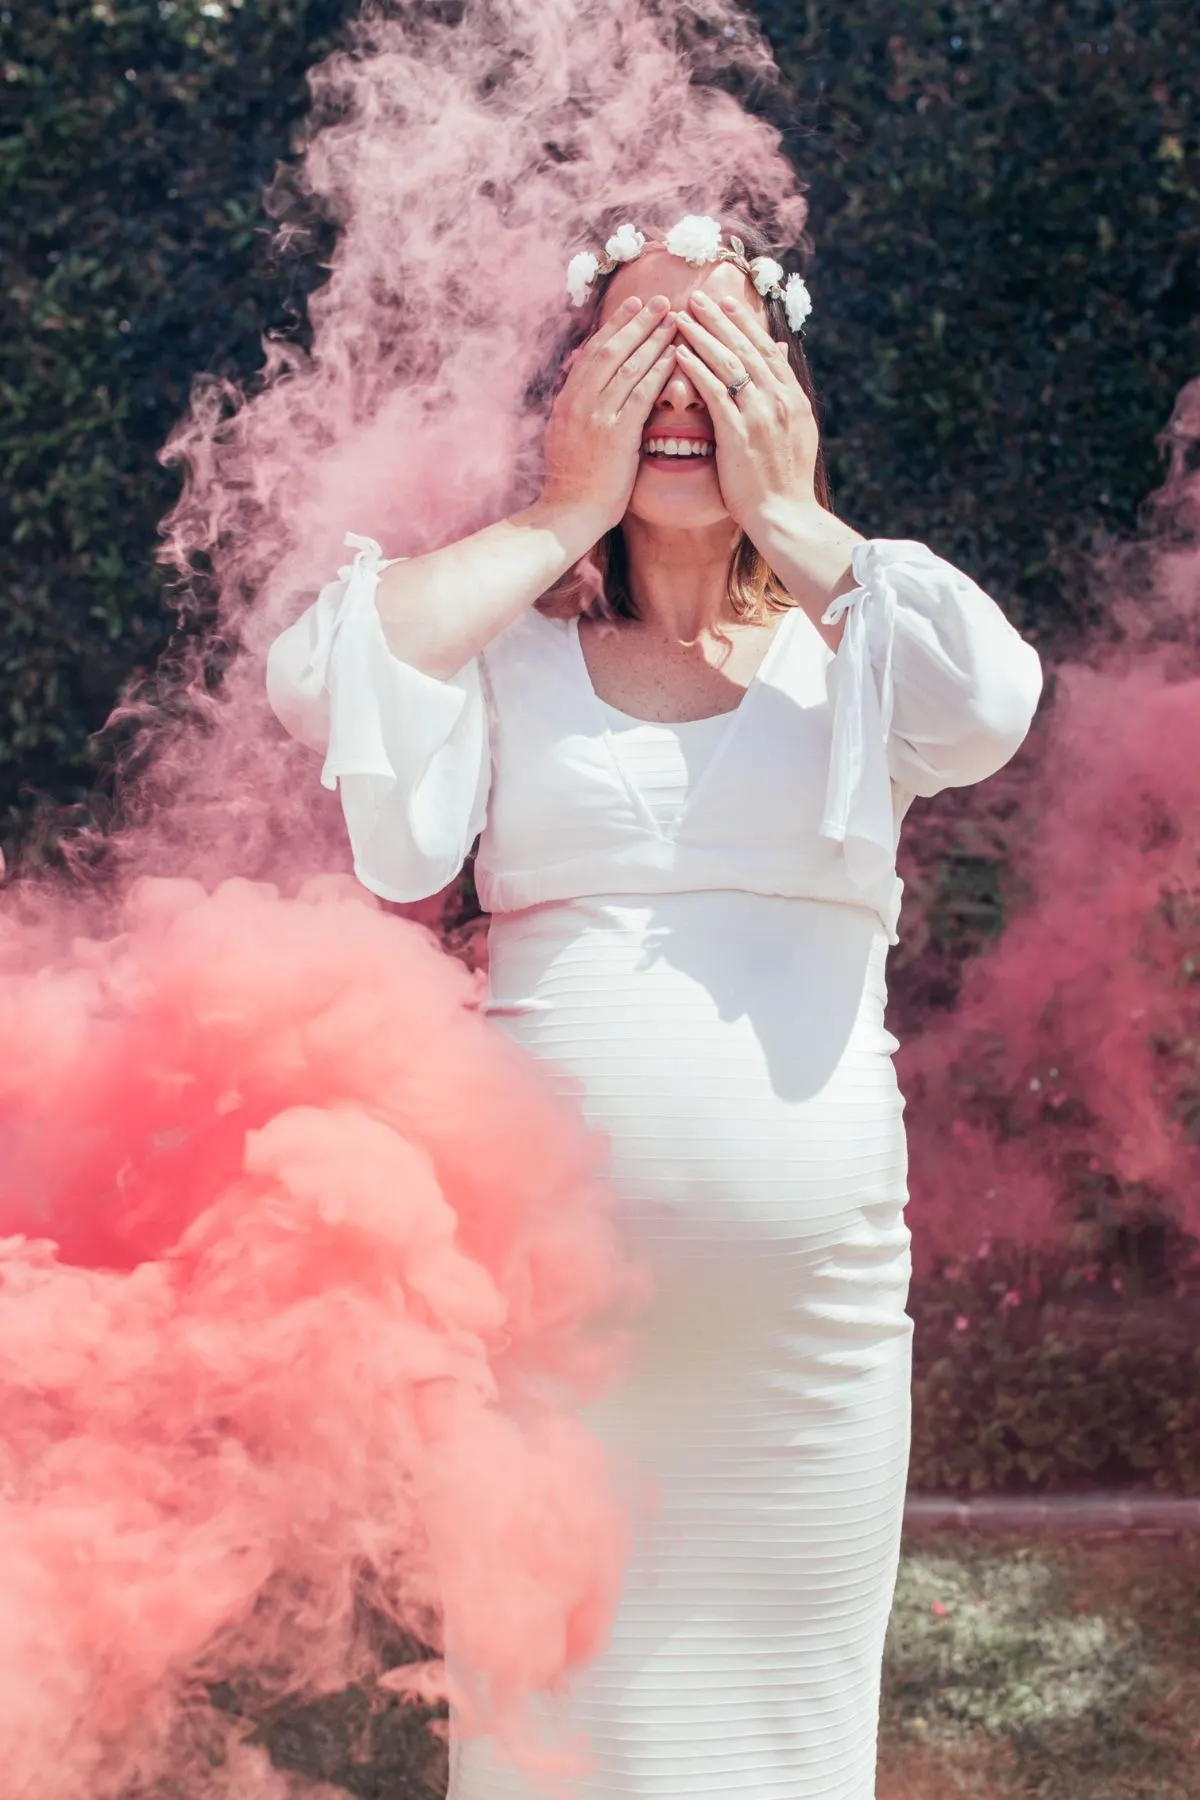 A woman in a white dress covers here eyes while surrounded by pink powder.